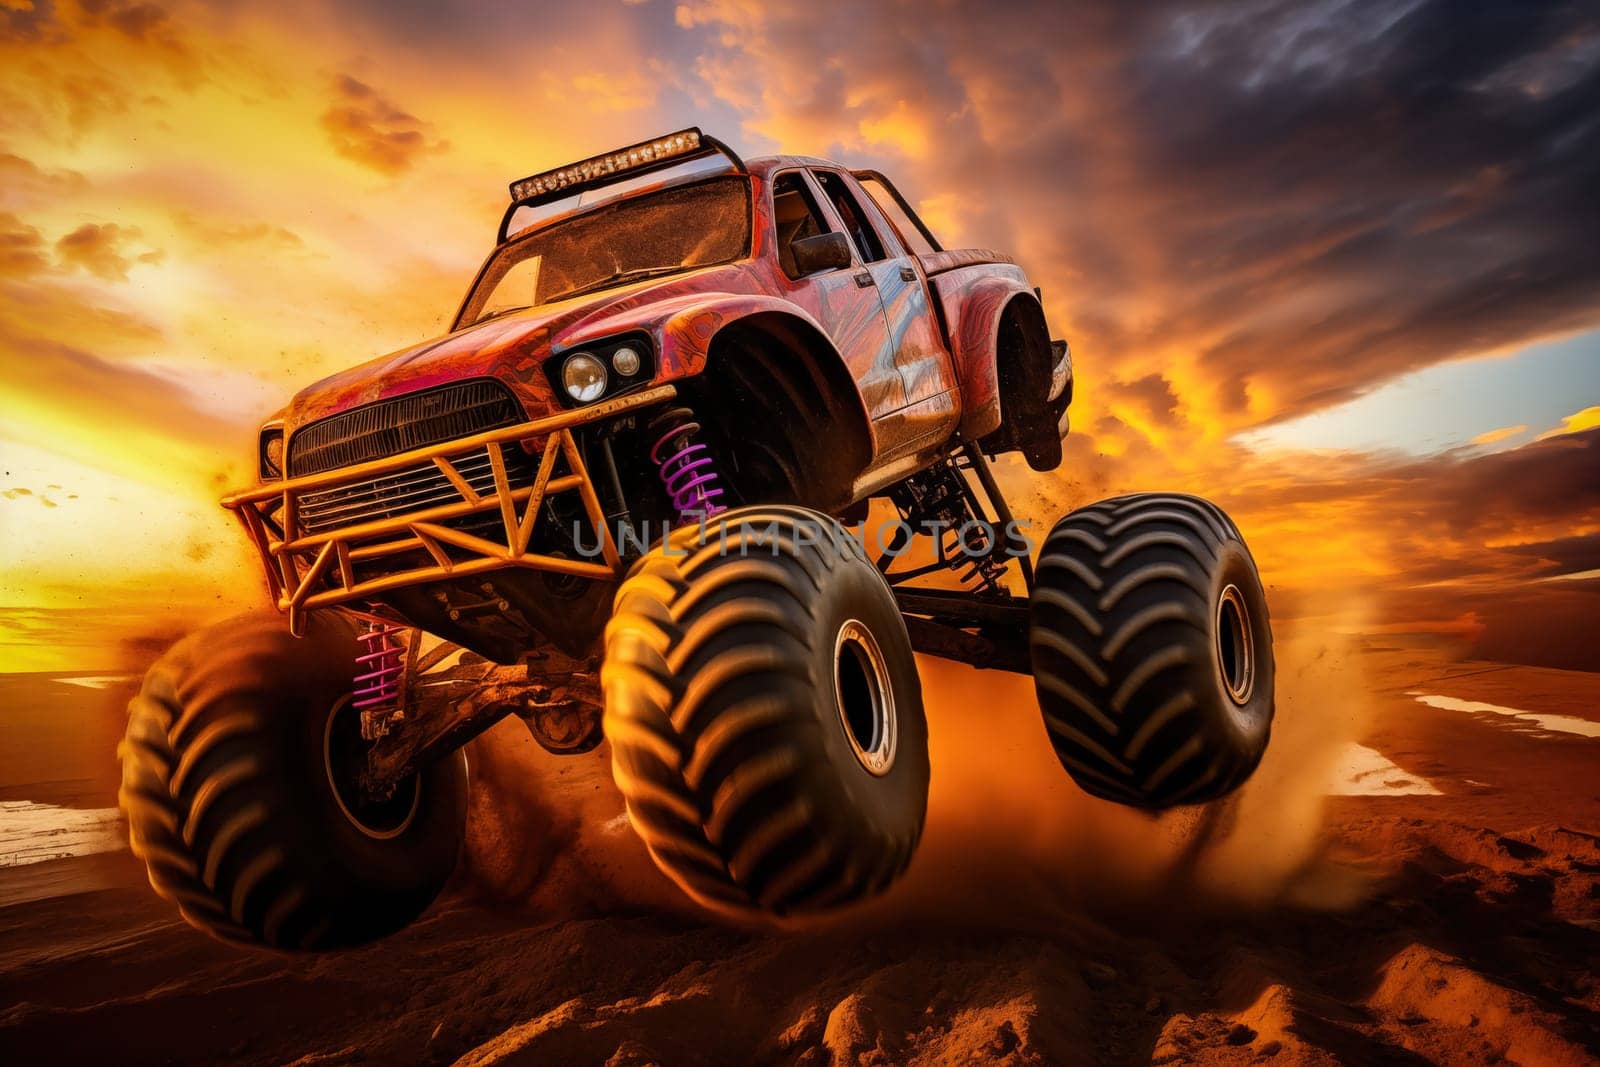 Monster Truck driving off-road outdoors by dimol